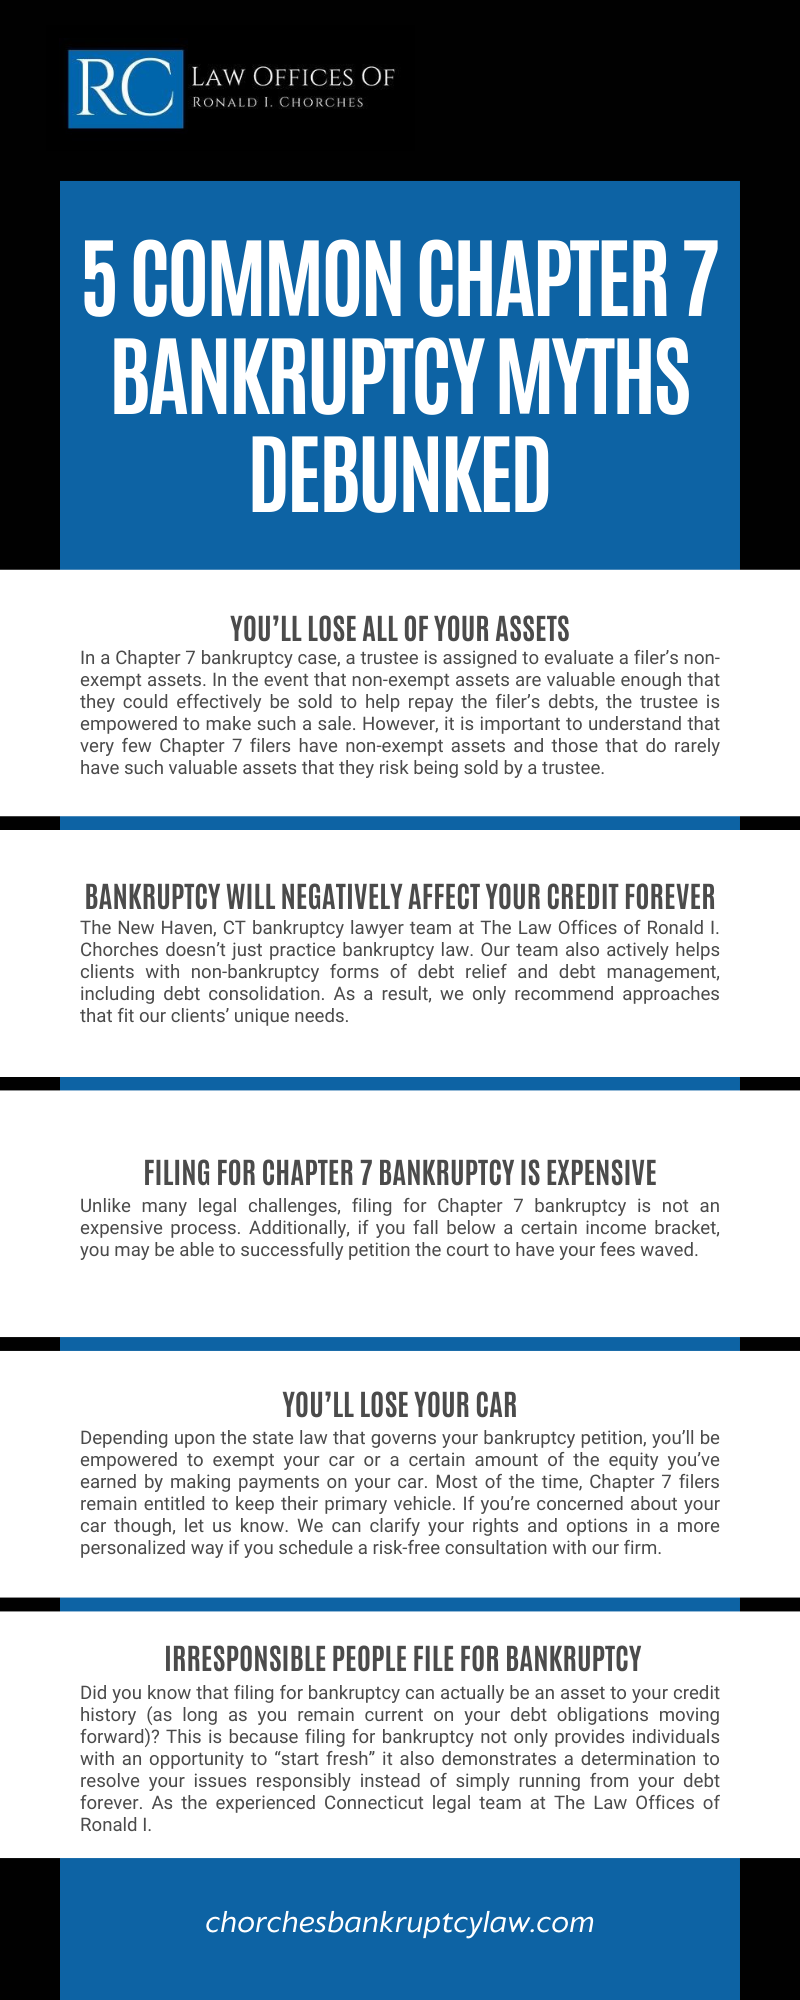 5 Common Chapter 7 Bankruptcy Myths Debunked